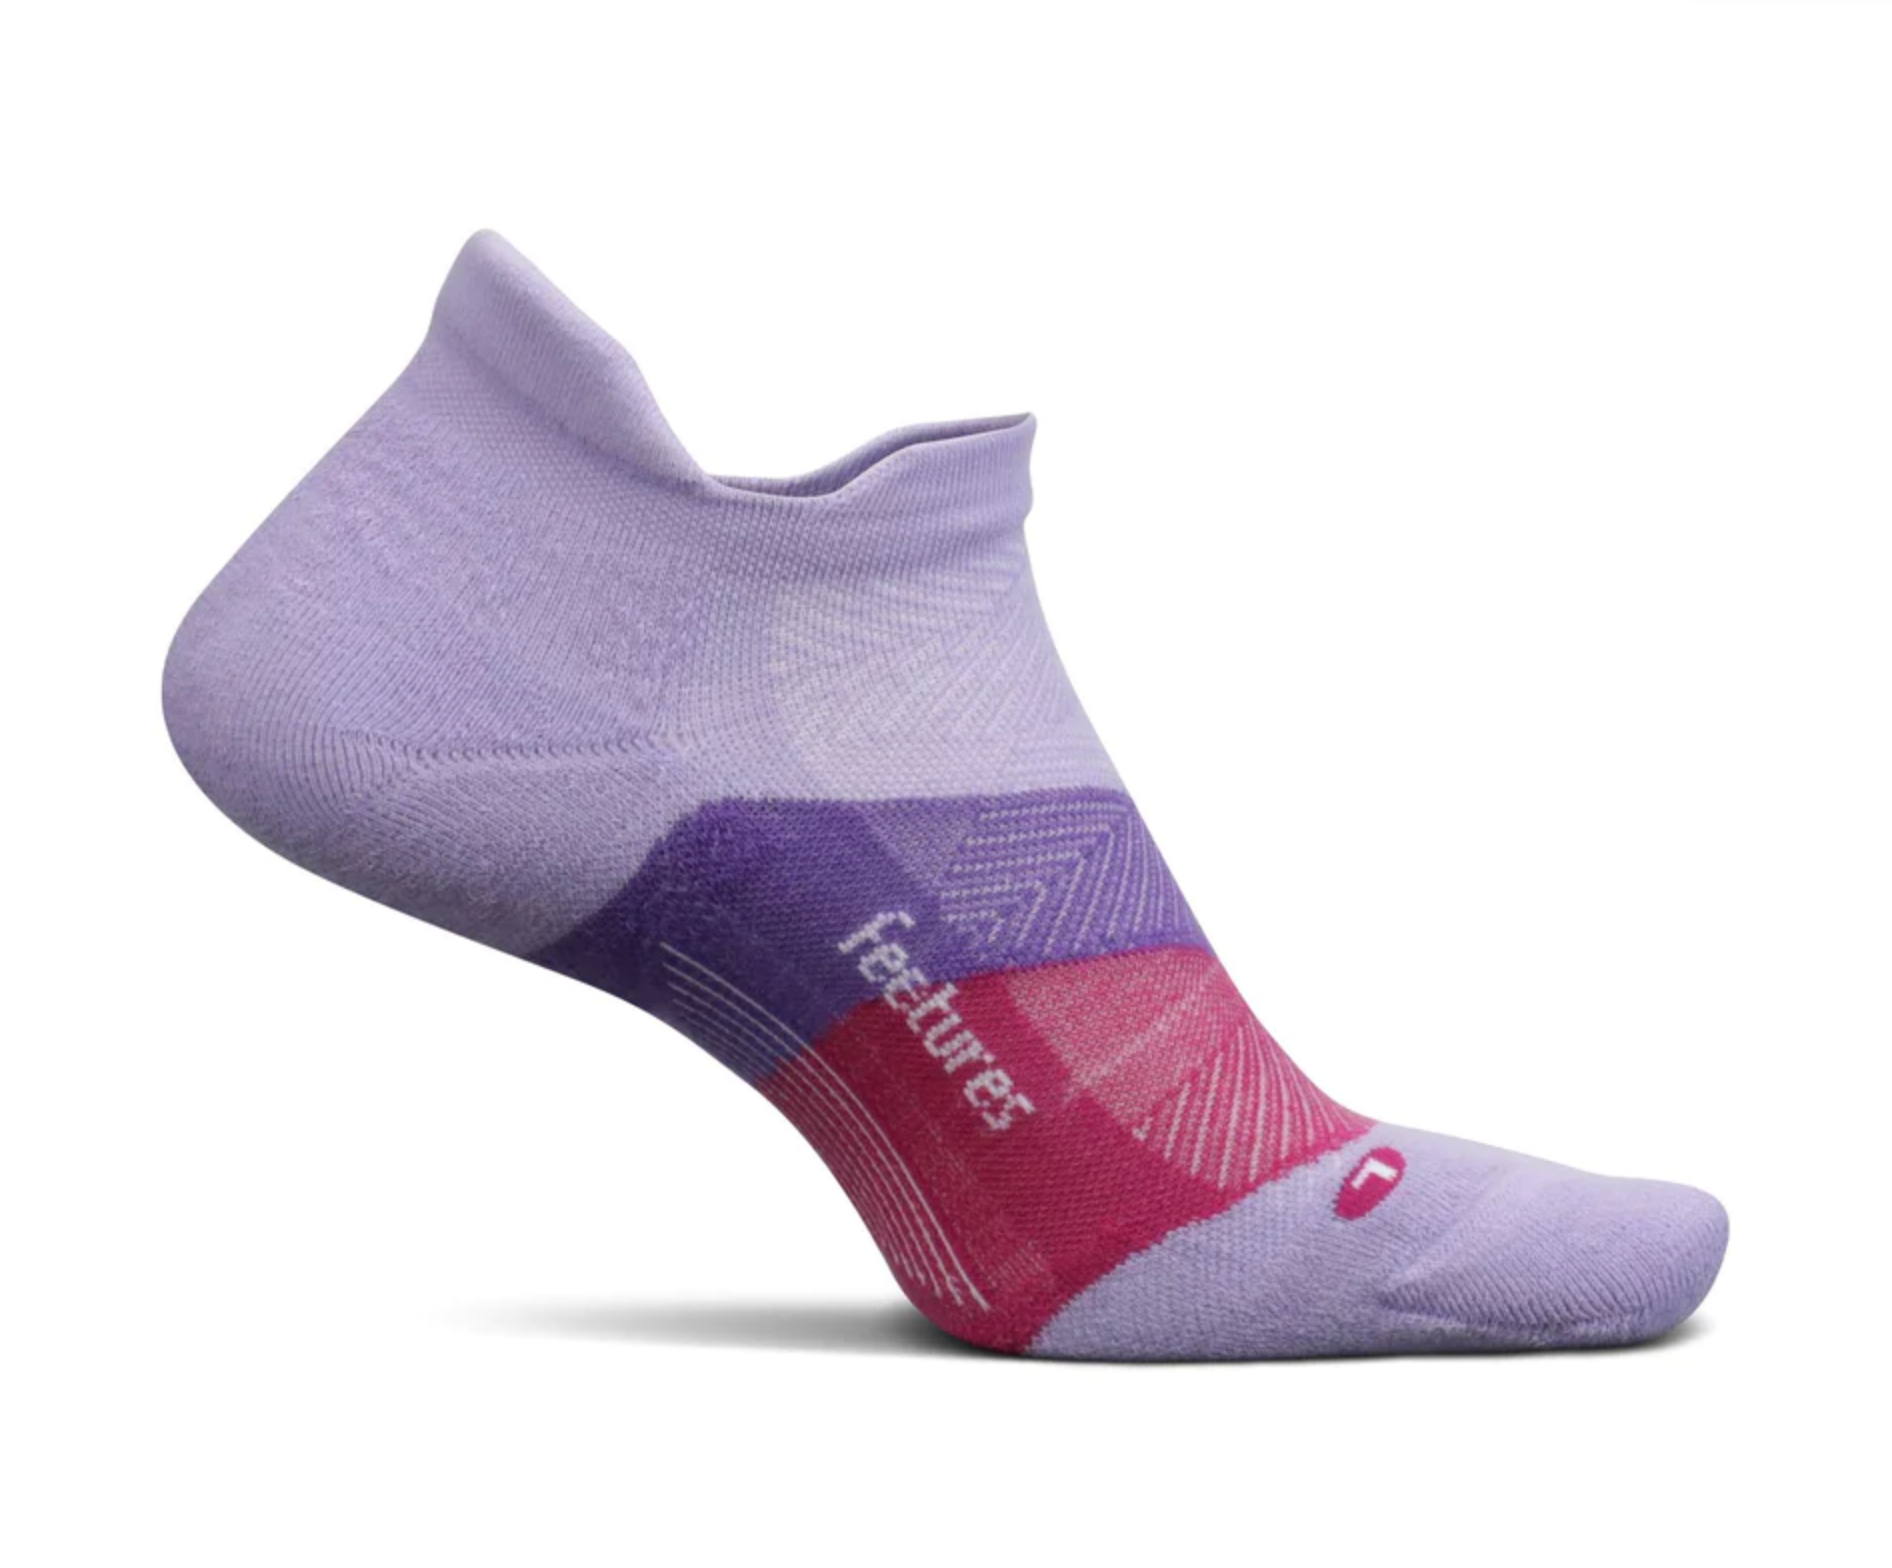 Elite Ultra Light Cushion No Show Tab - Lace Up Lavender - Feetures